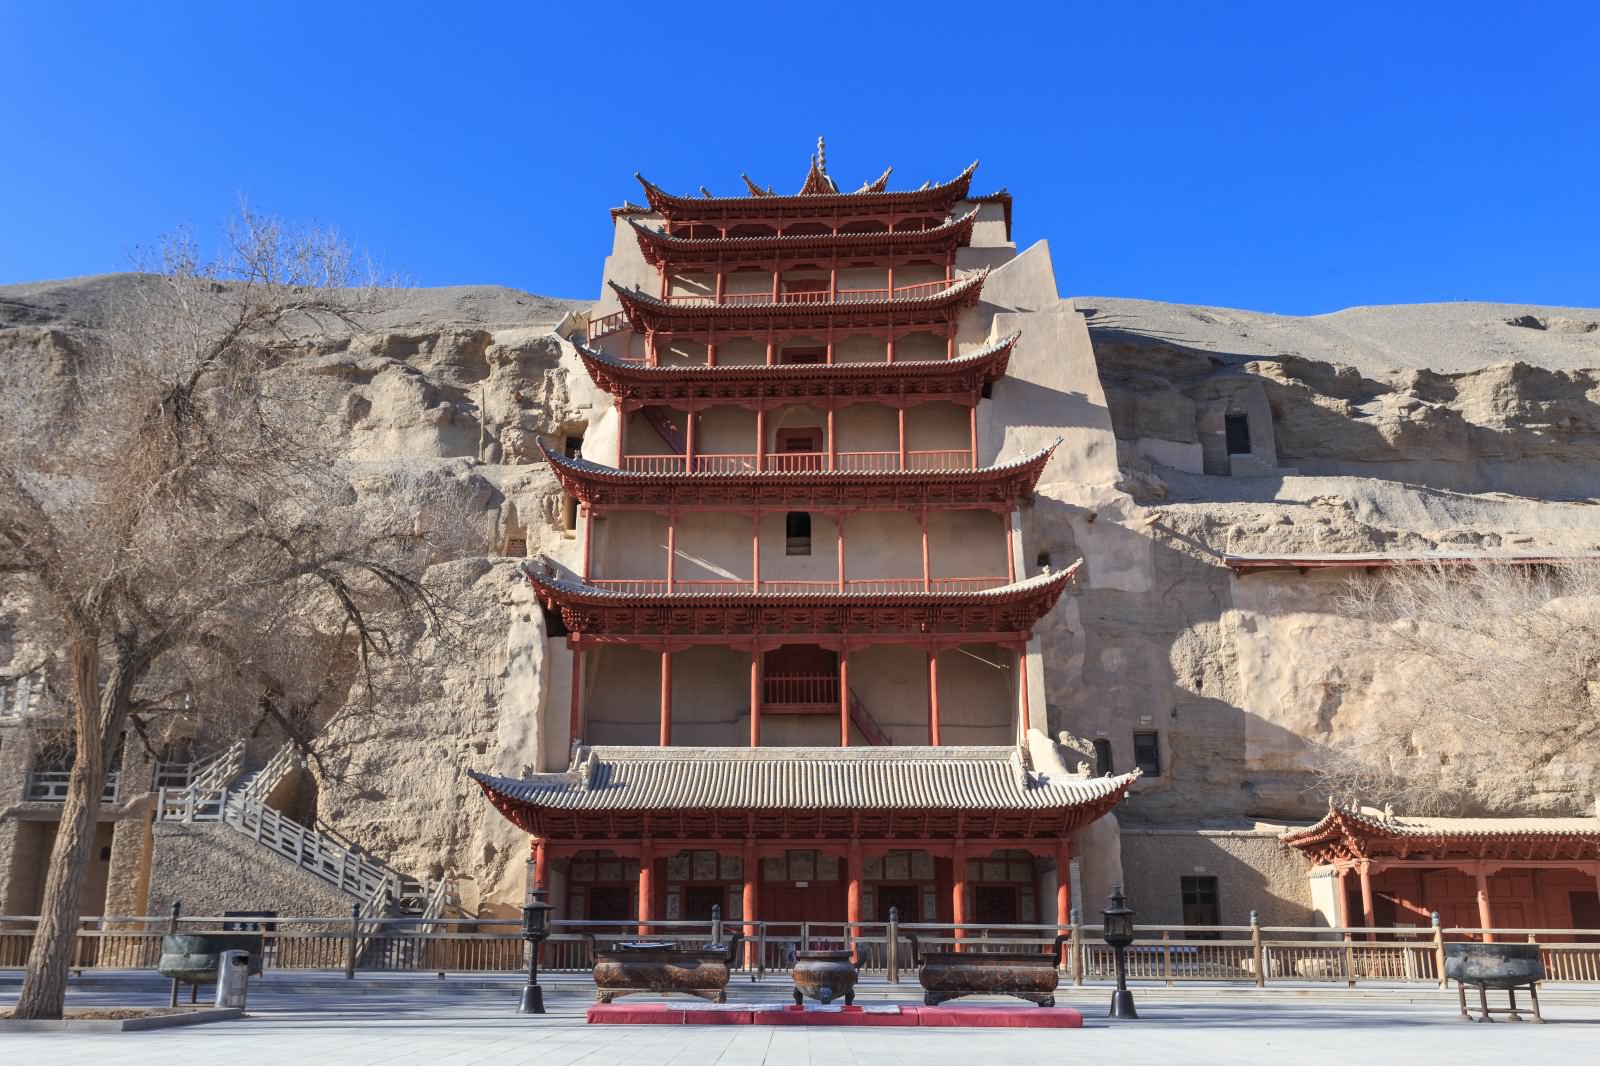 Front Picture Of The Mogao Caves In China